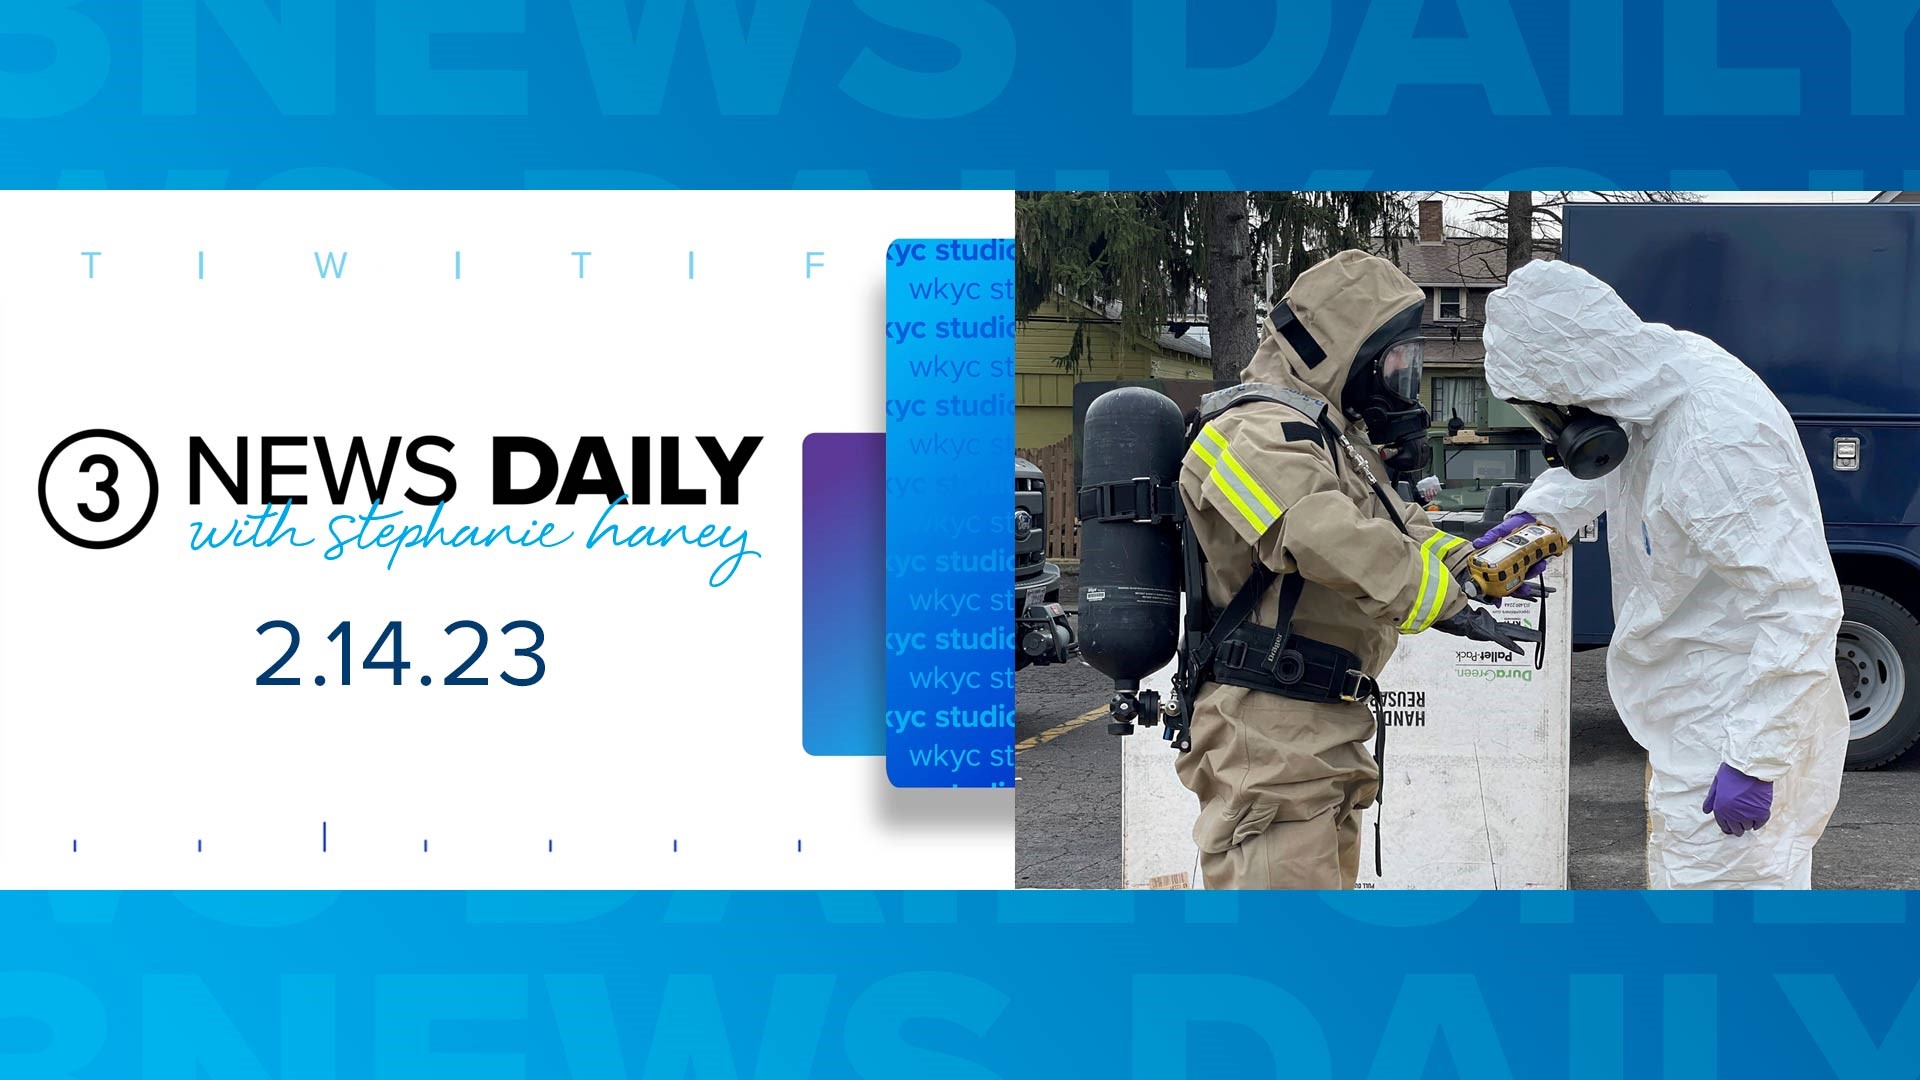 New on 3, get the latest information on what's happening and impacting you across Northeast Ohio on Tuesday, February 14, 2023, on 3News Daily with Stephanie Haney.